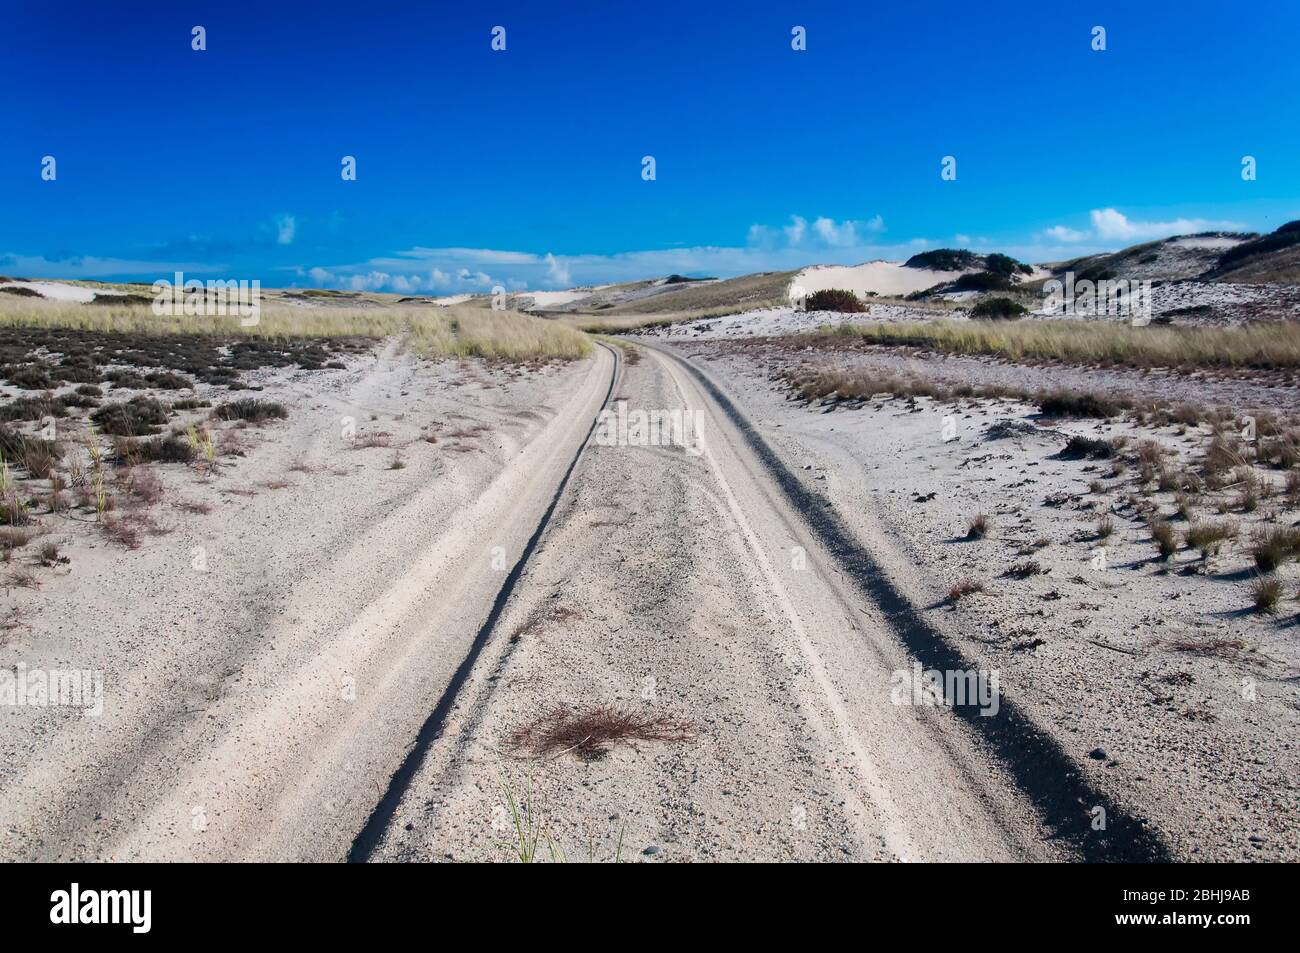 Sandy tire tracks running through the national seashore in cape cod massachusetts on a sunny blue sky day. Stock Photo